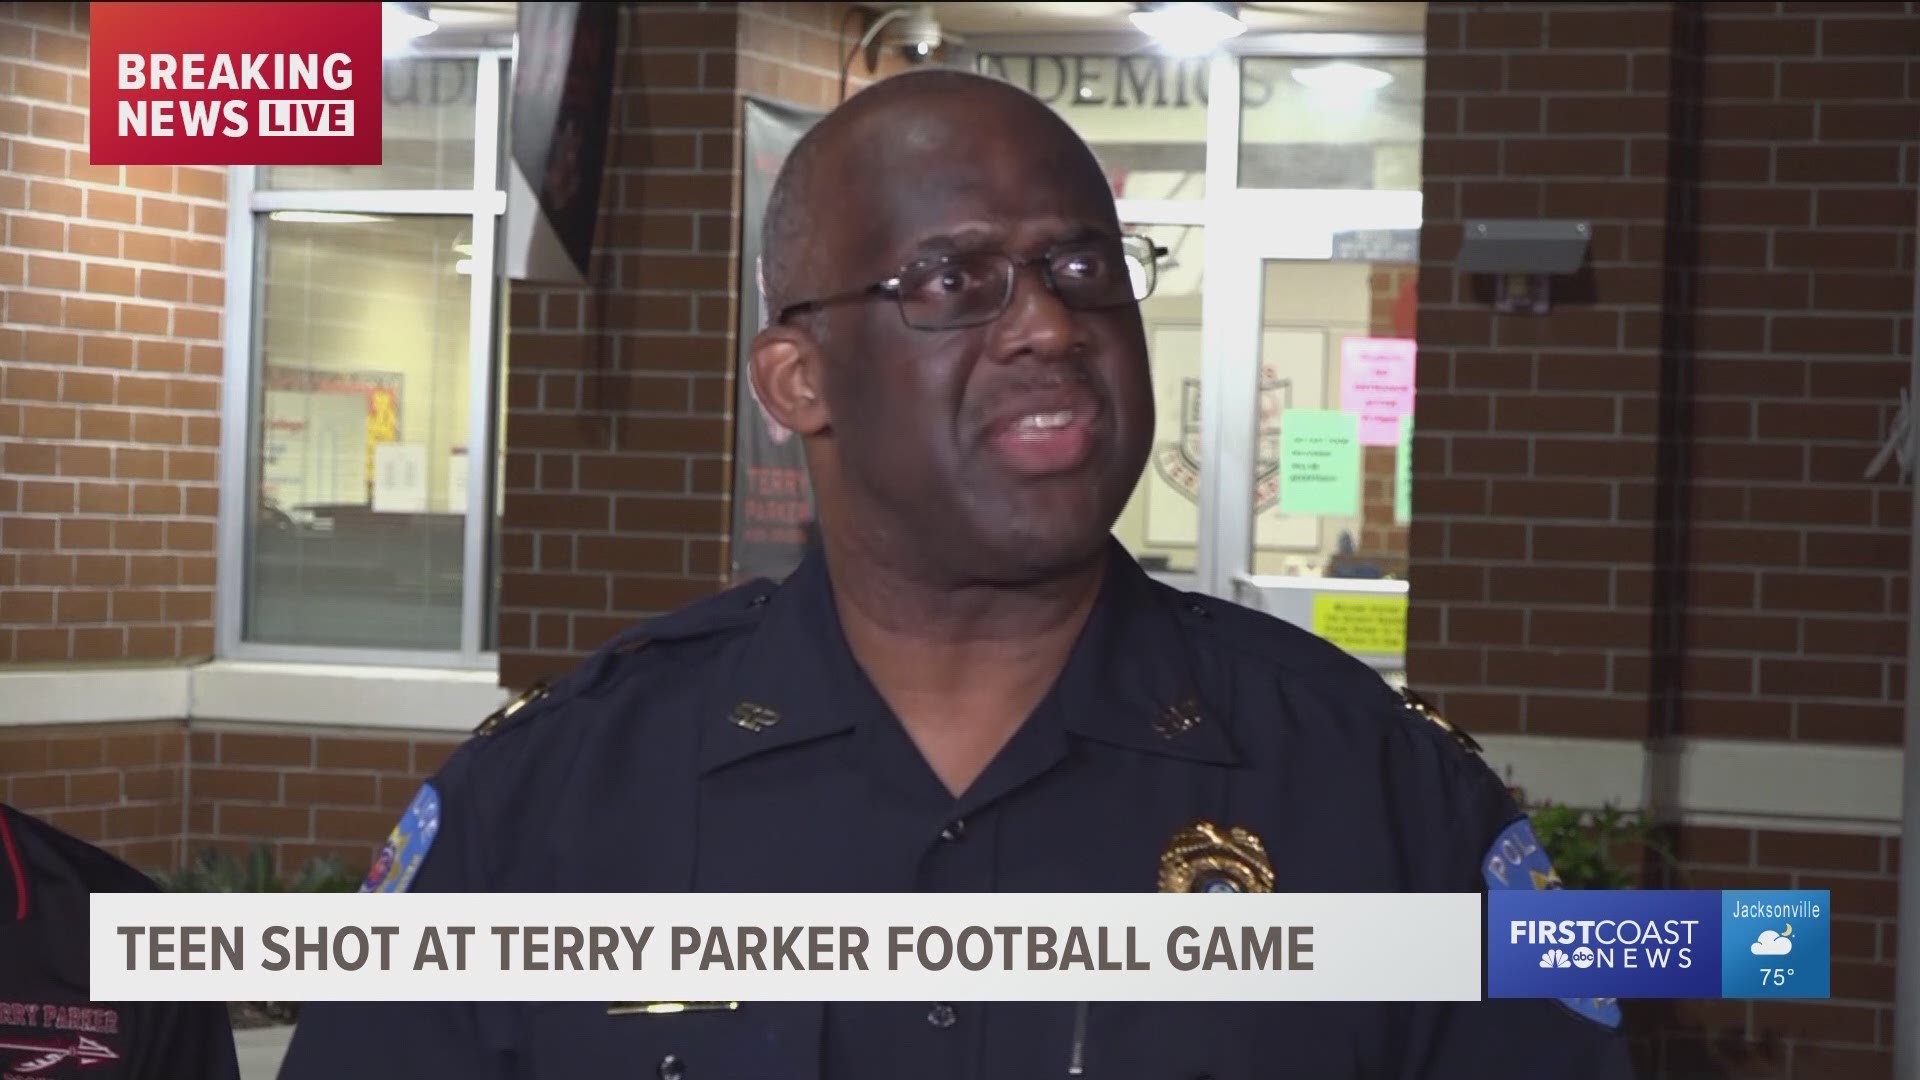 A teenager was shot outside the football gates at Terry Parker High School during a spring football game vs. Ribault High School Friday night.